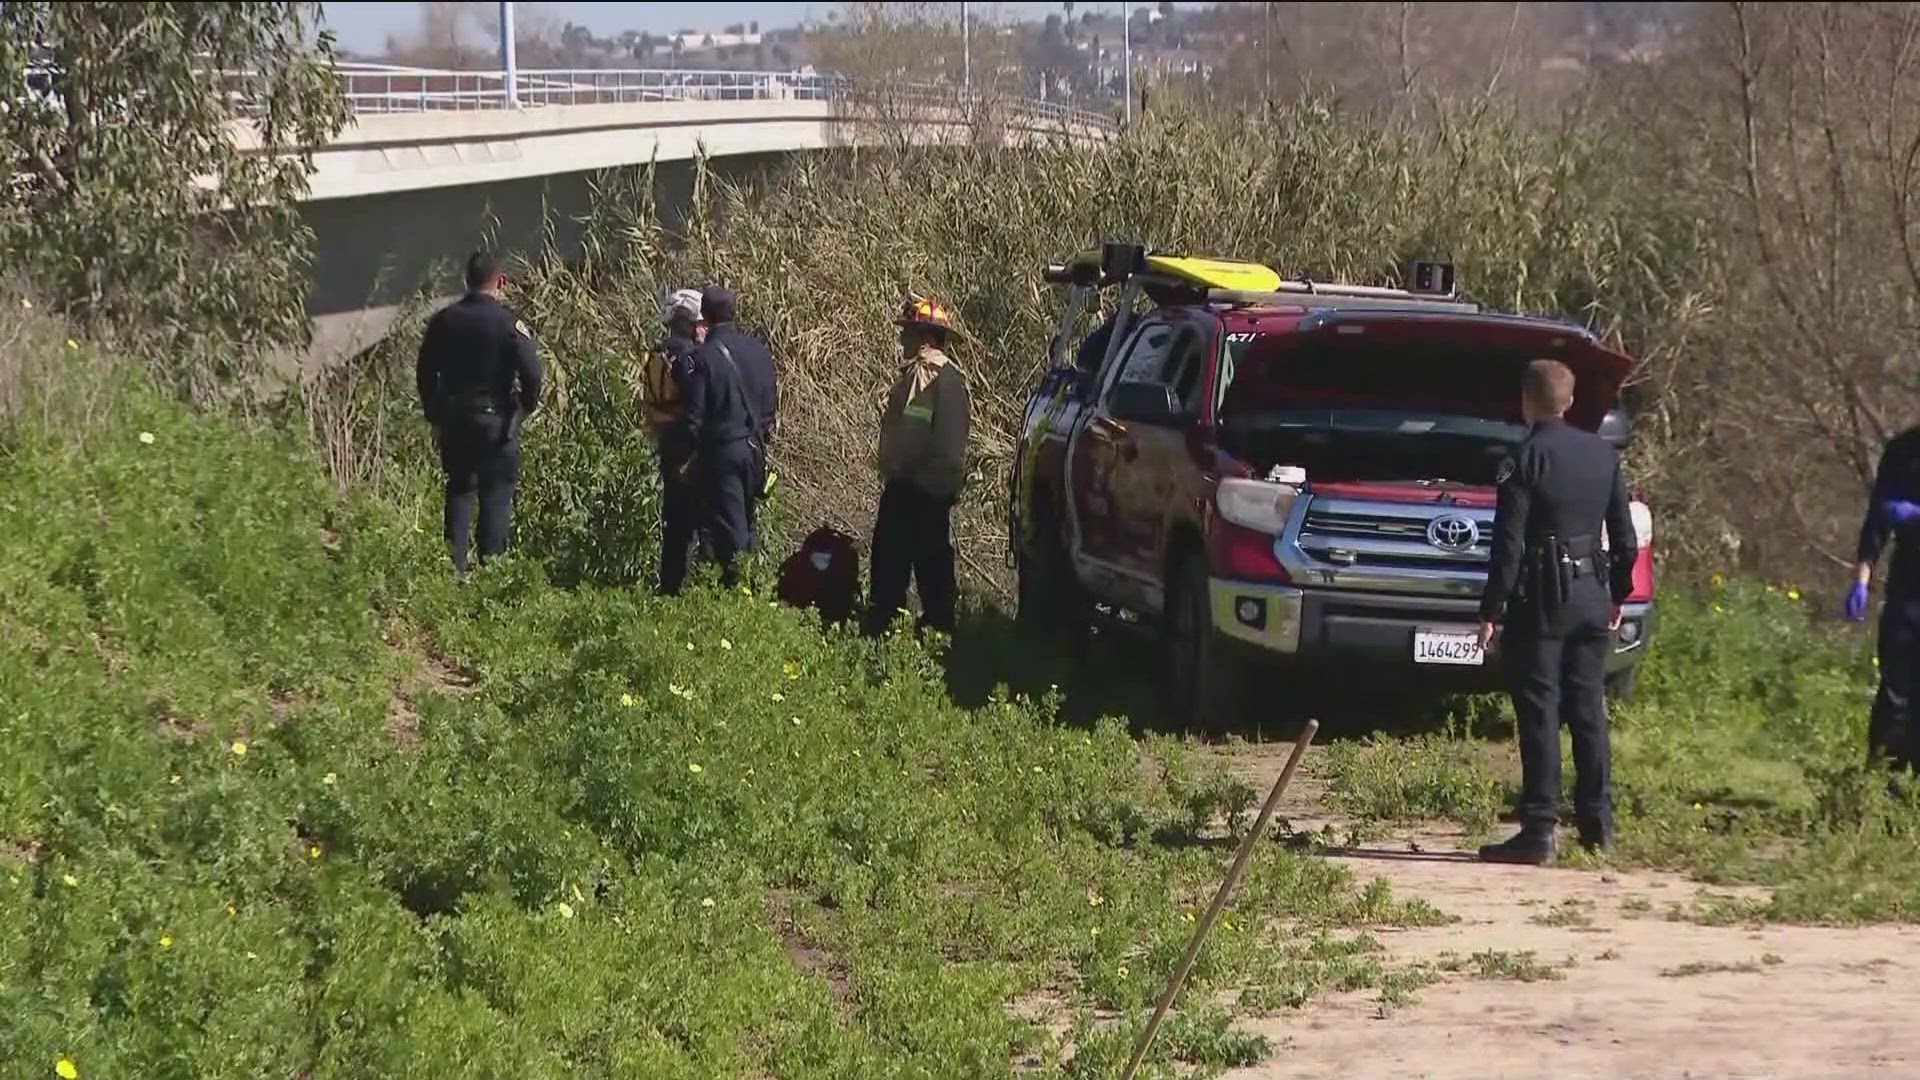 San Diego Police are investigating after two bodies were recovered from a channel near Dairy Mart Road on Thursday.